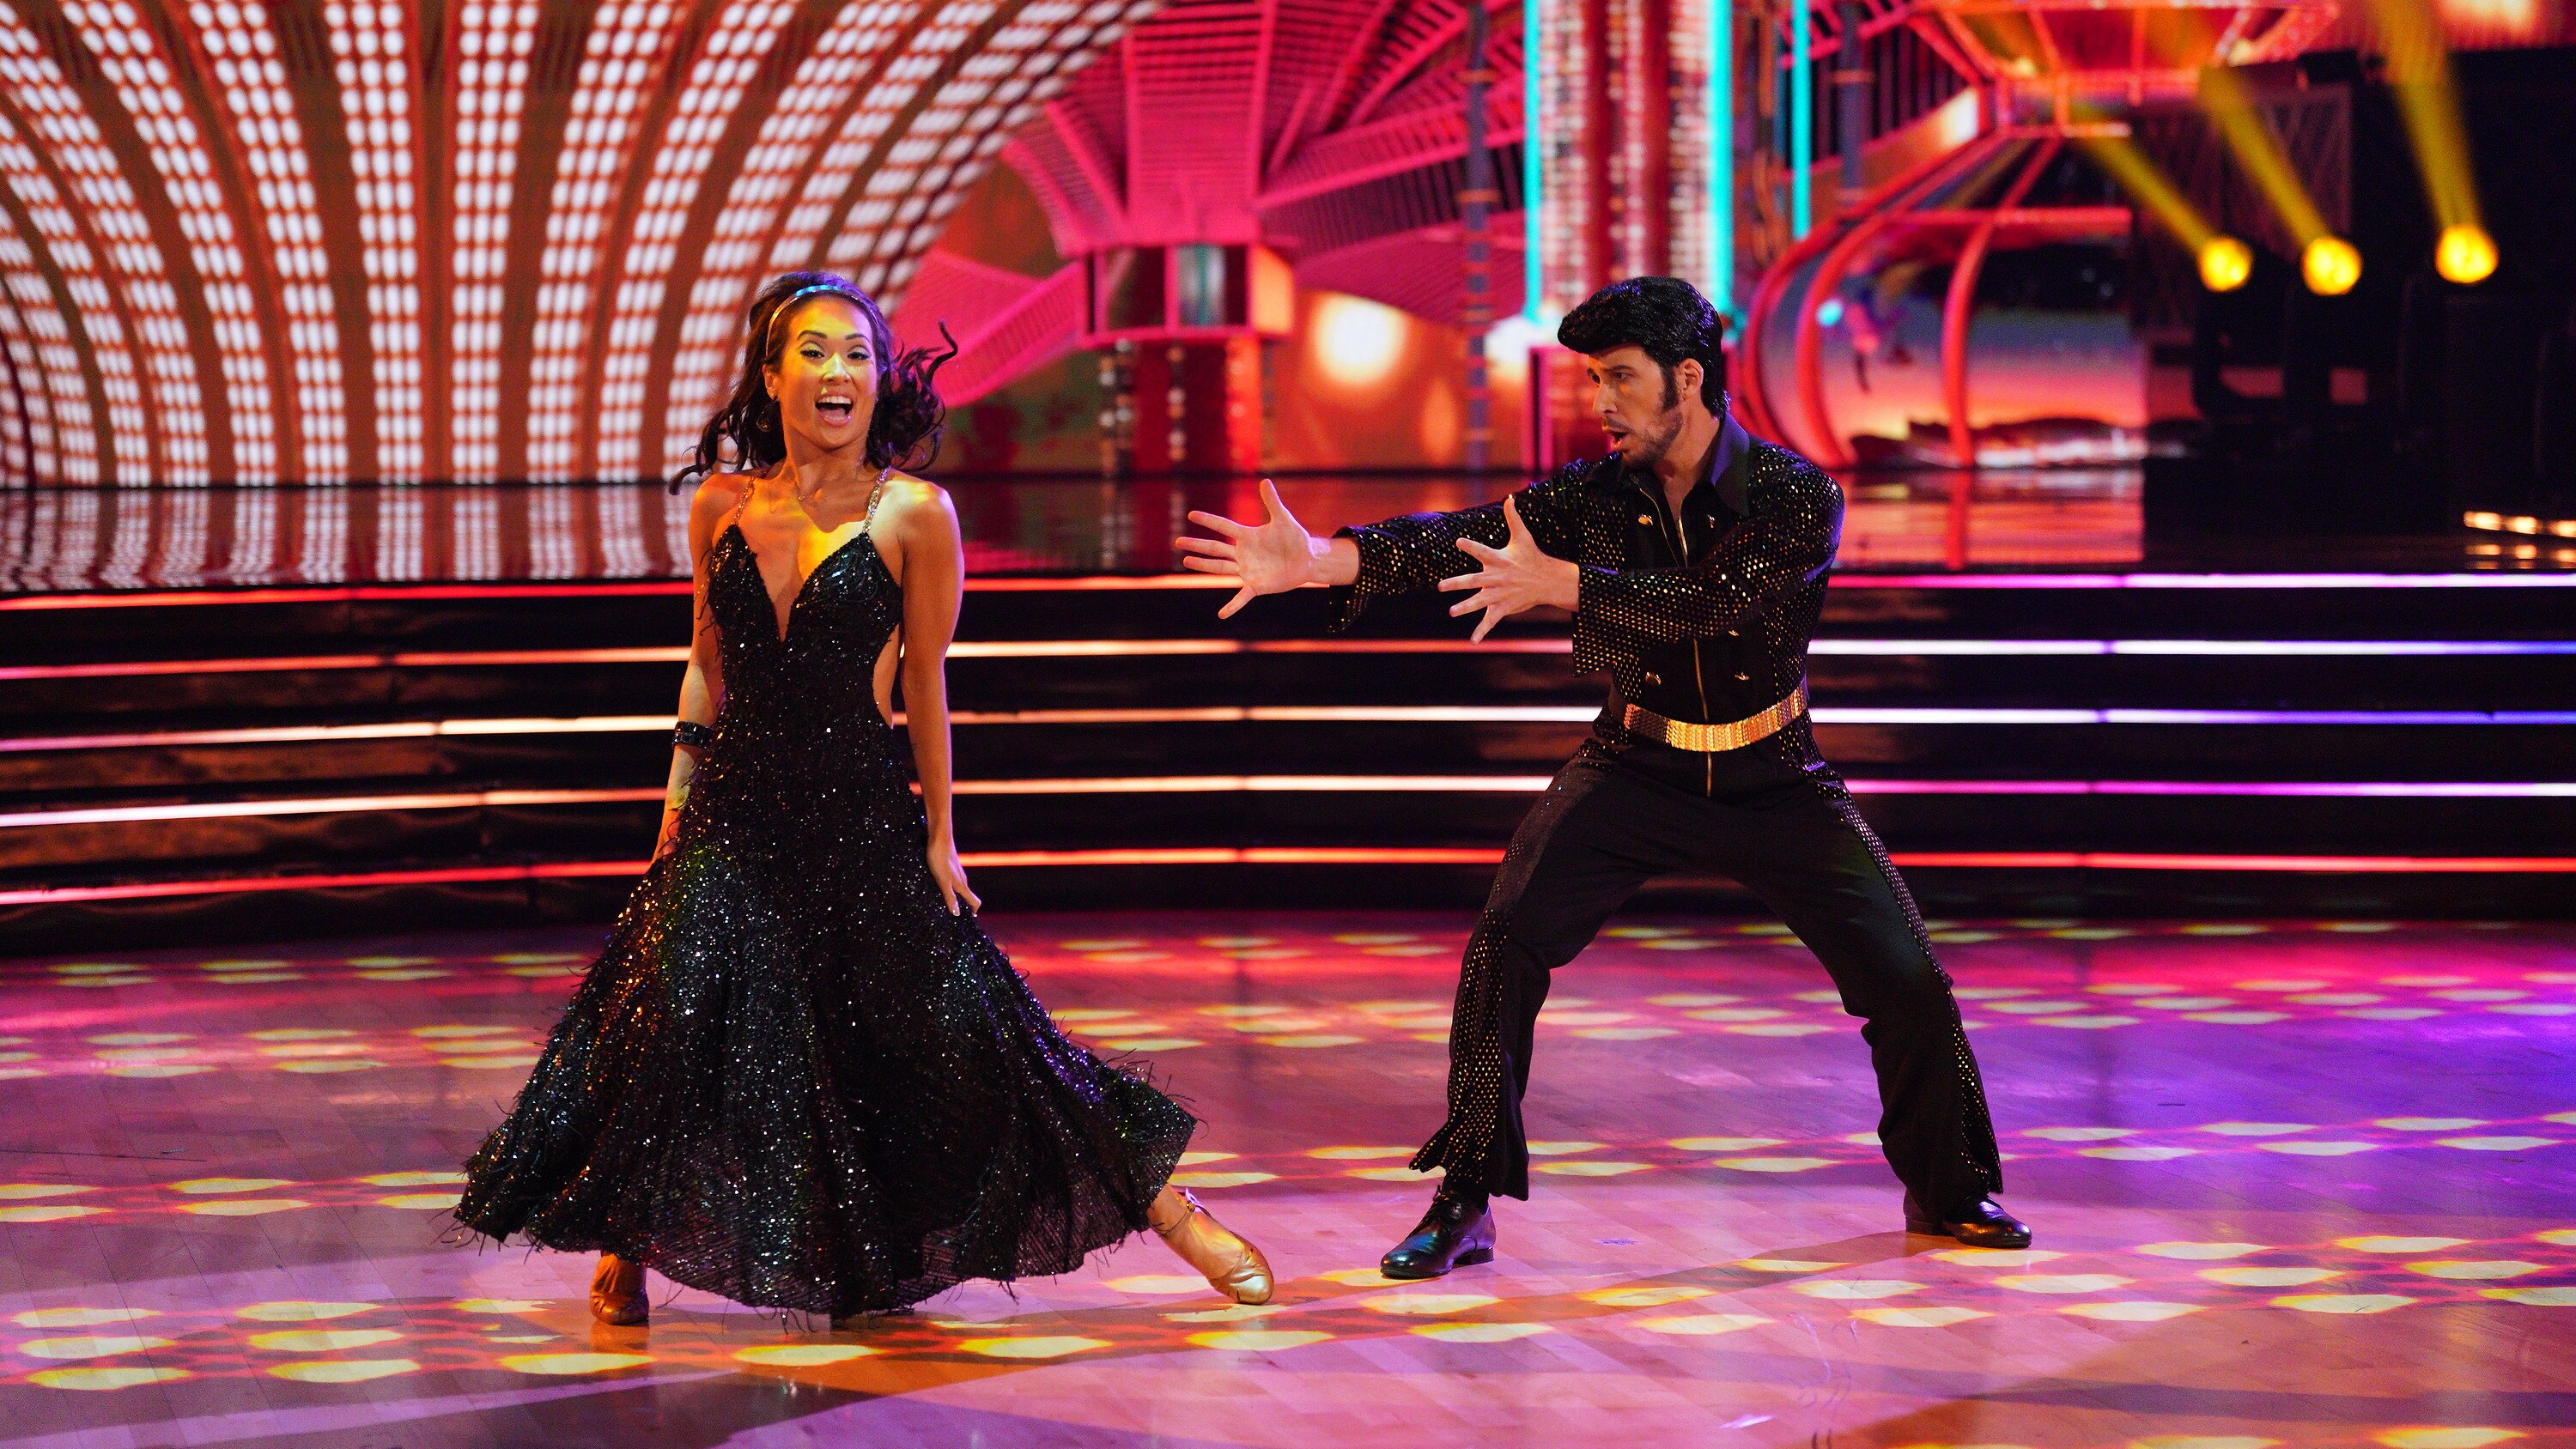 DANCING WITH THE STARS - “Elvis Night” –  The 15 remaining couples “Can’t Help Falling in Love” with Elvis this week as they take on all-new dance styles to music by The King of Rock ‘n’ Roll. Week two of the mirorrball competition will stream live MONDAY, SEPT. 26 (8:00pm ET / 5:00pm PT), on Disney+. (ABC/Christopher Willard) KOKO IWASAKI, VINNY GUADAGNINO